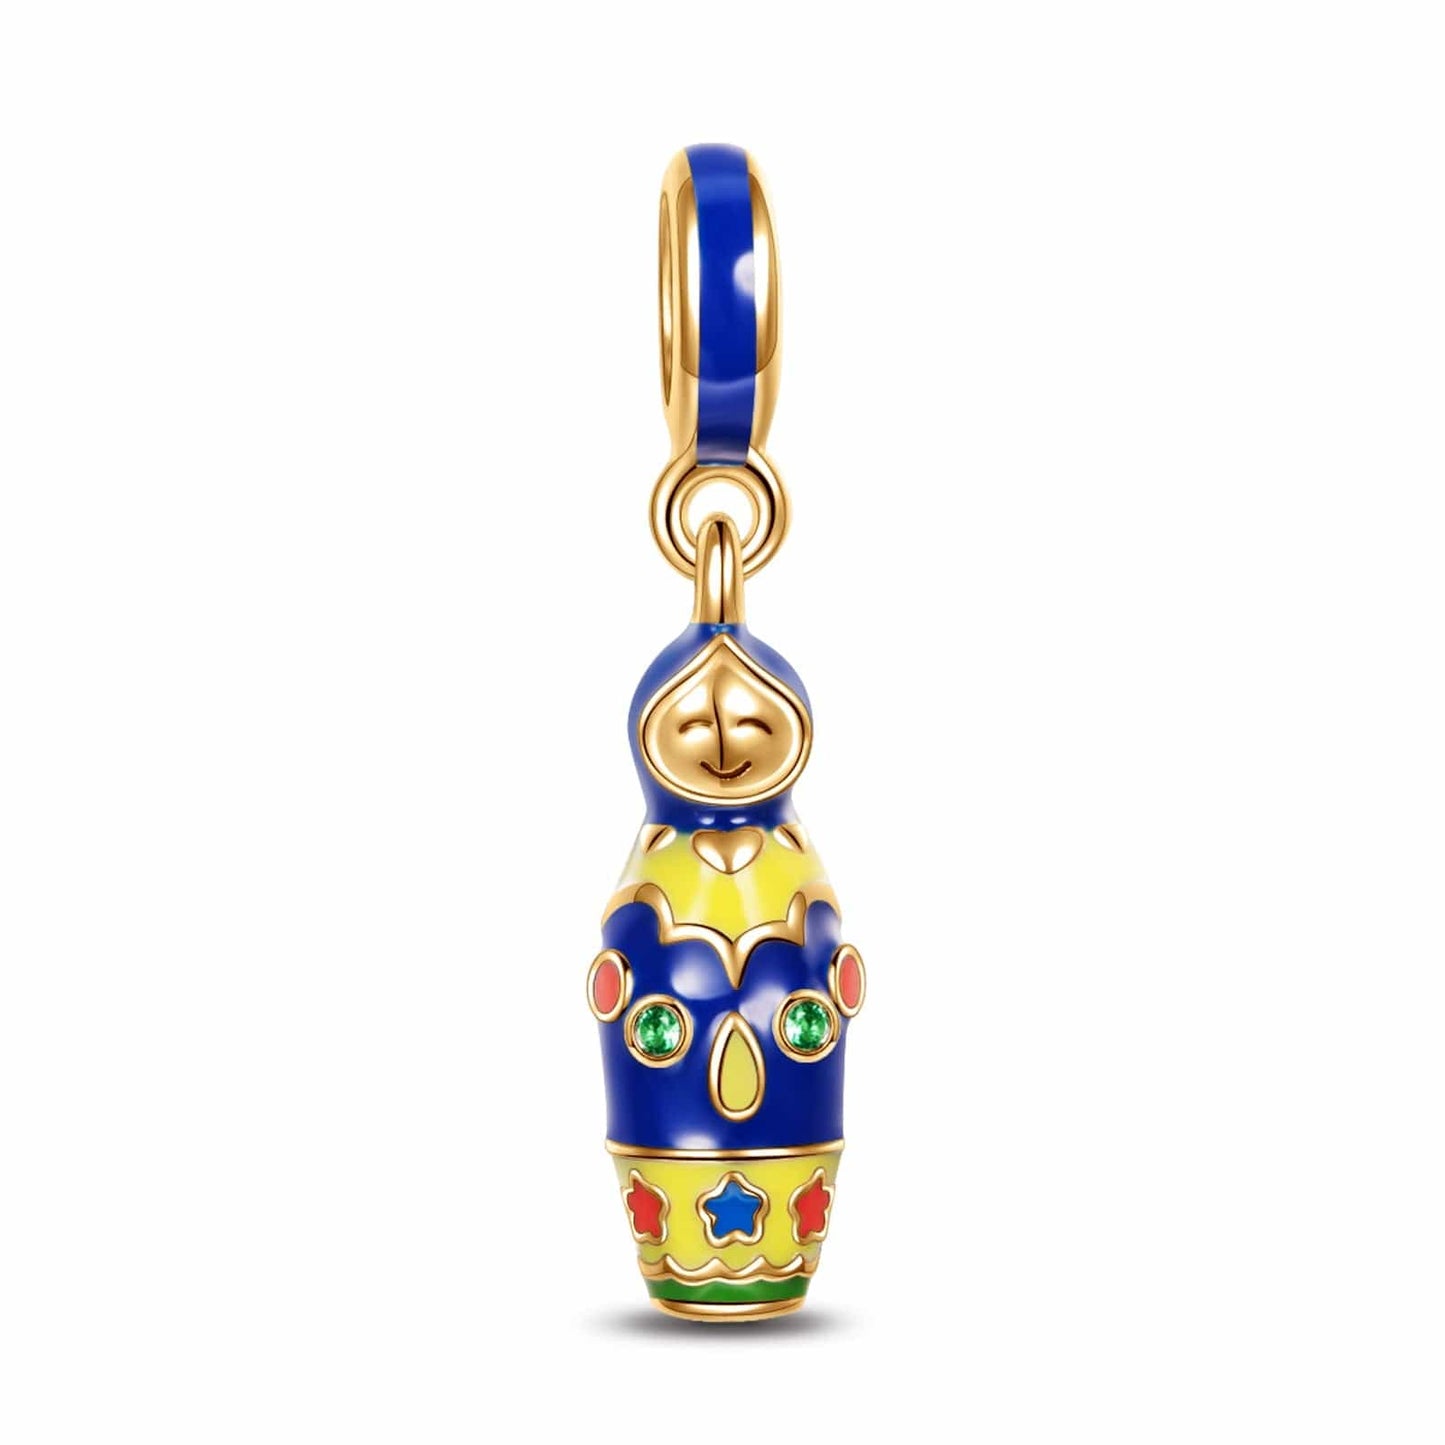 Blue Matryoshka Doll Tarnish-resistant Silver Dangle Charms With Enamel In 14K Gold Plated - GONA